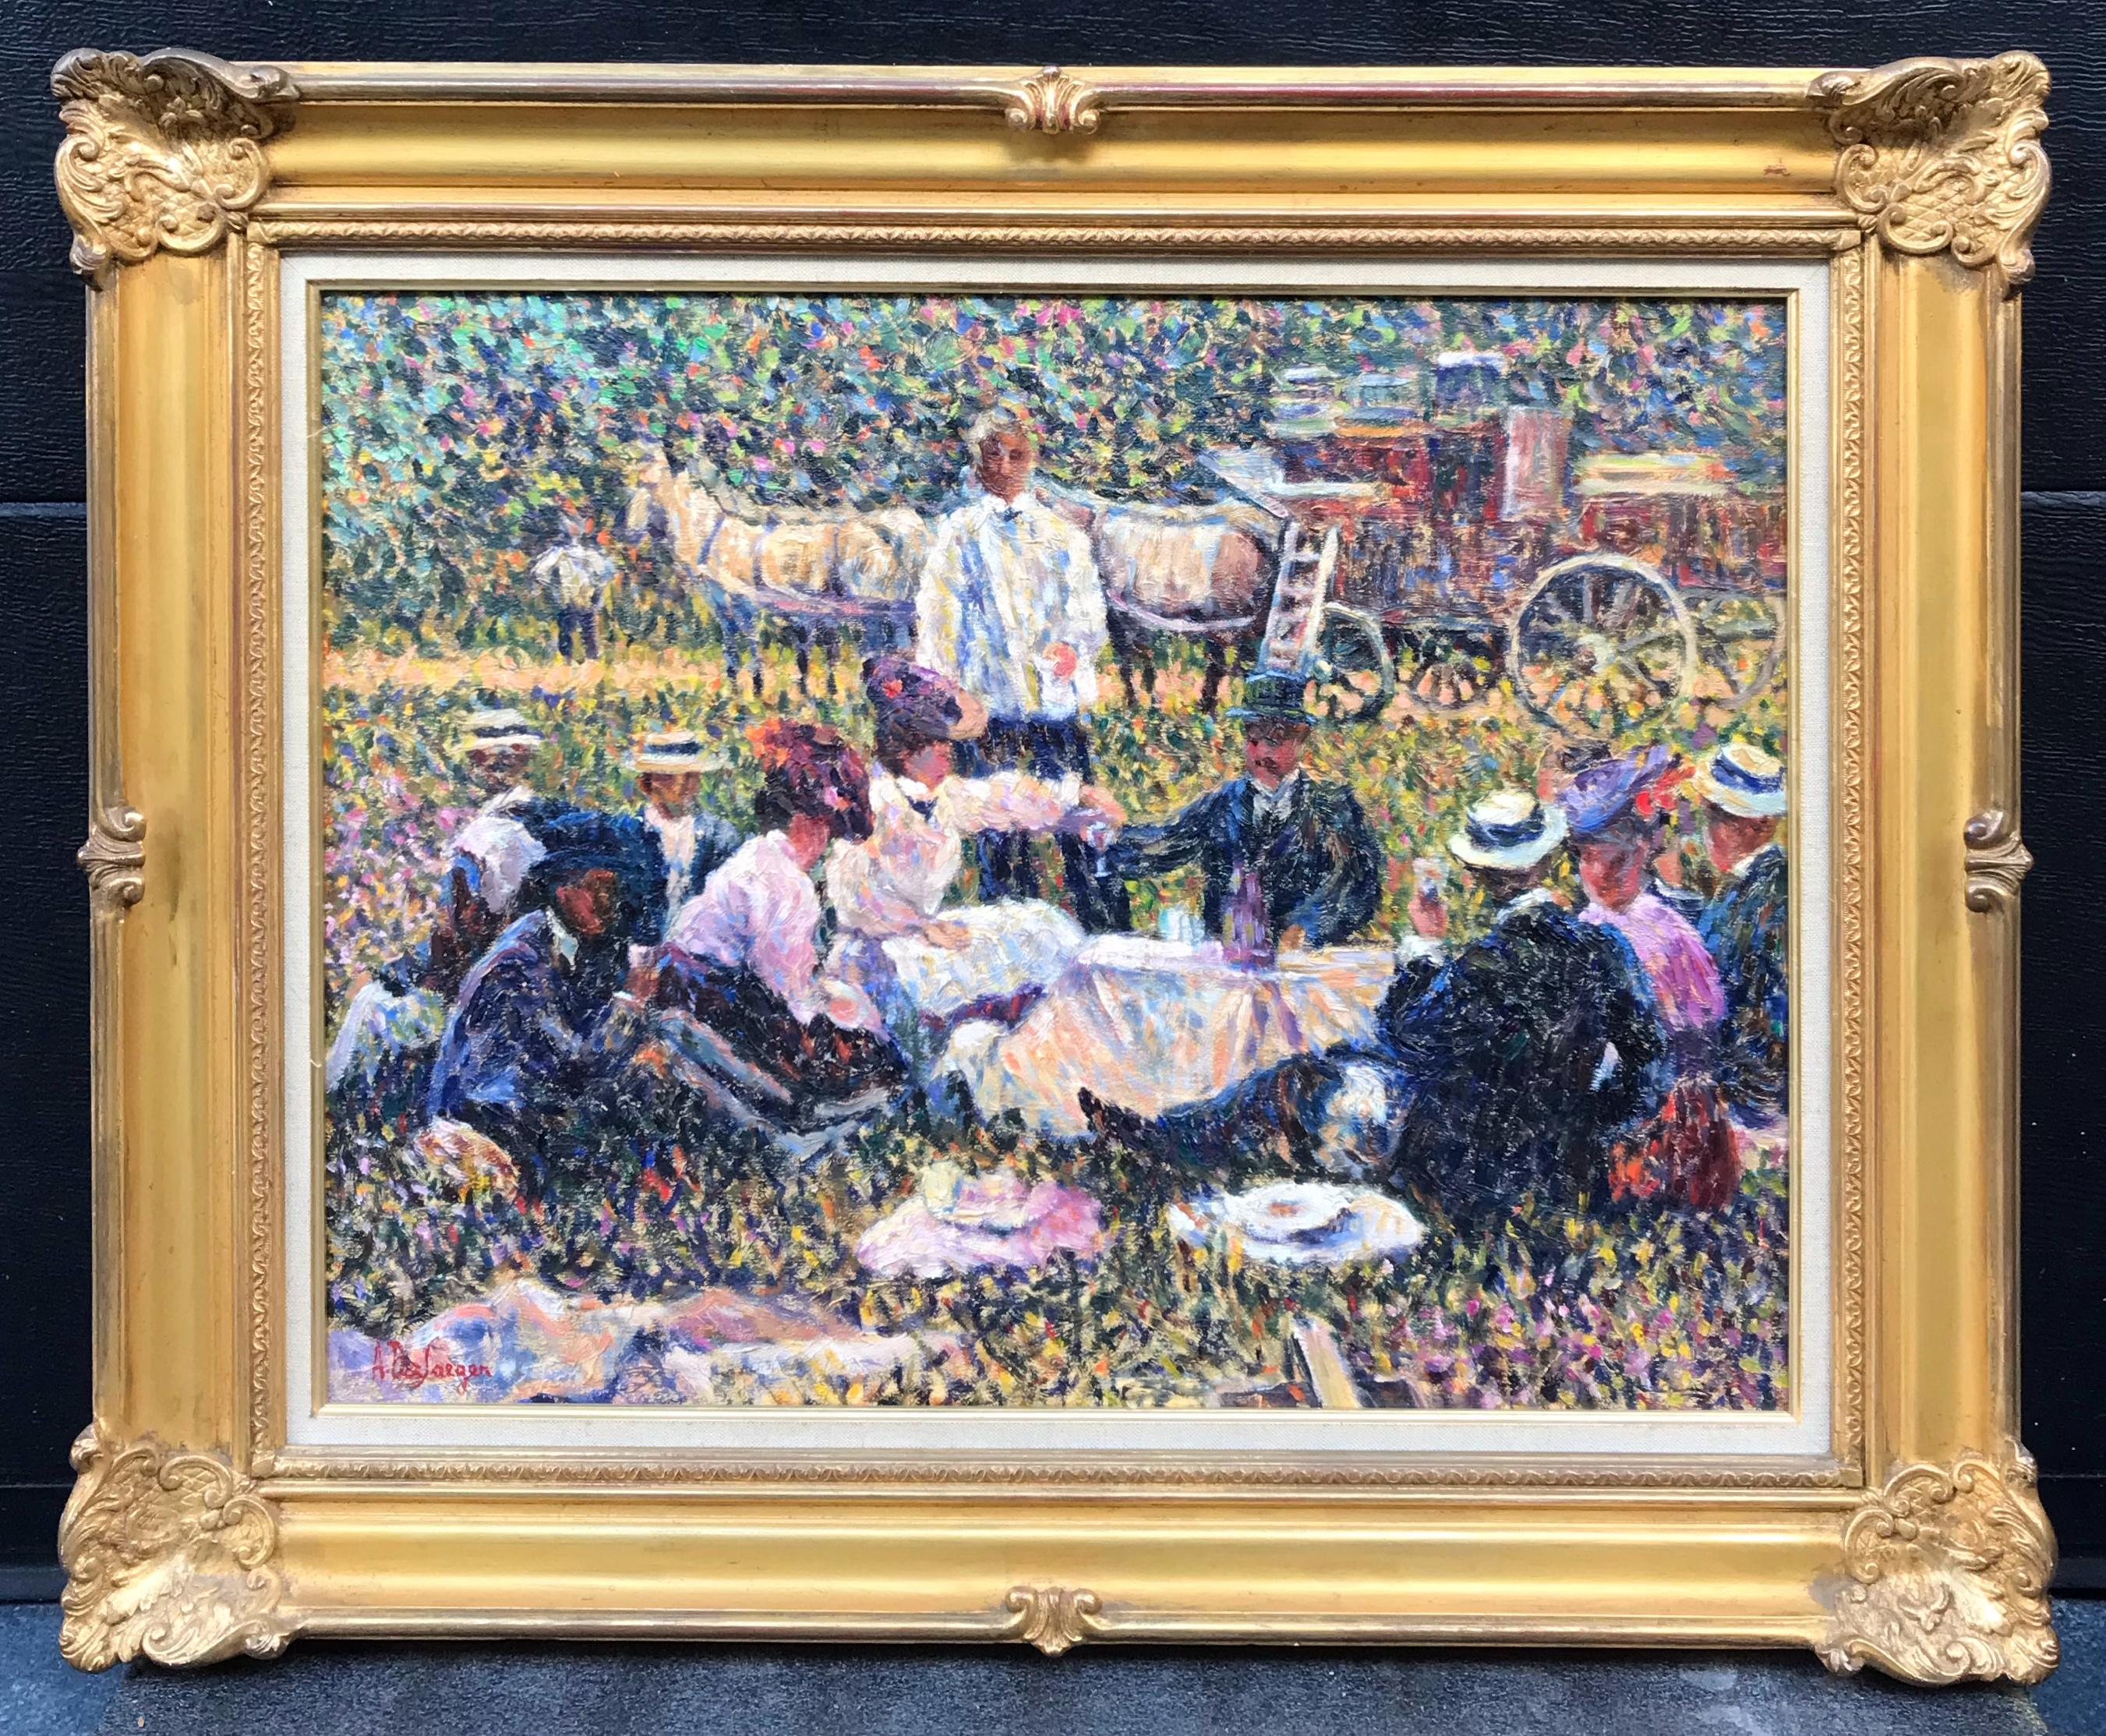 Lunch On The Grass - Post-Impressionist painting